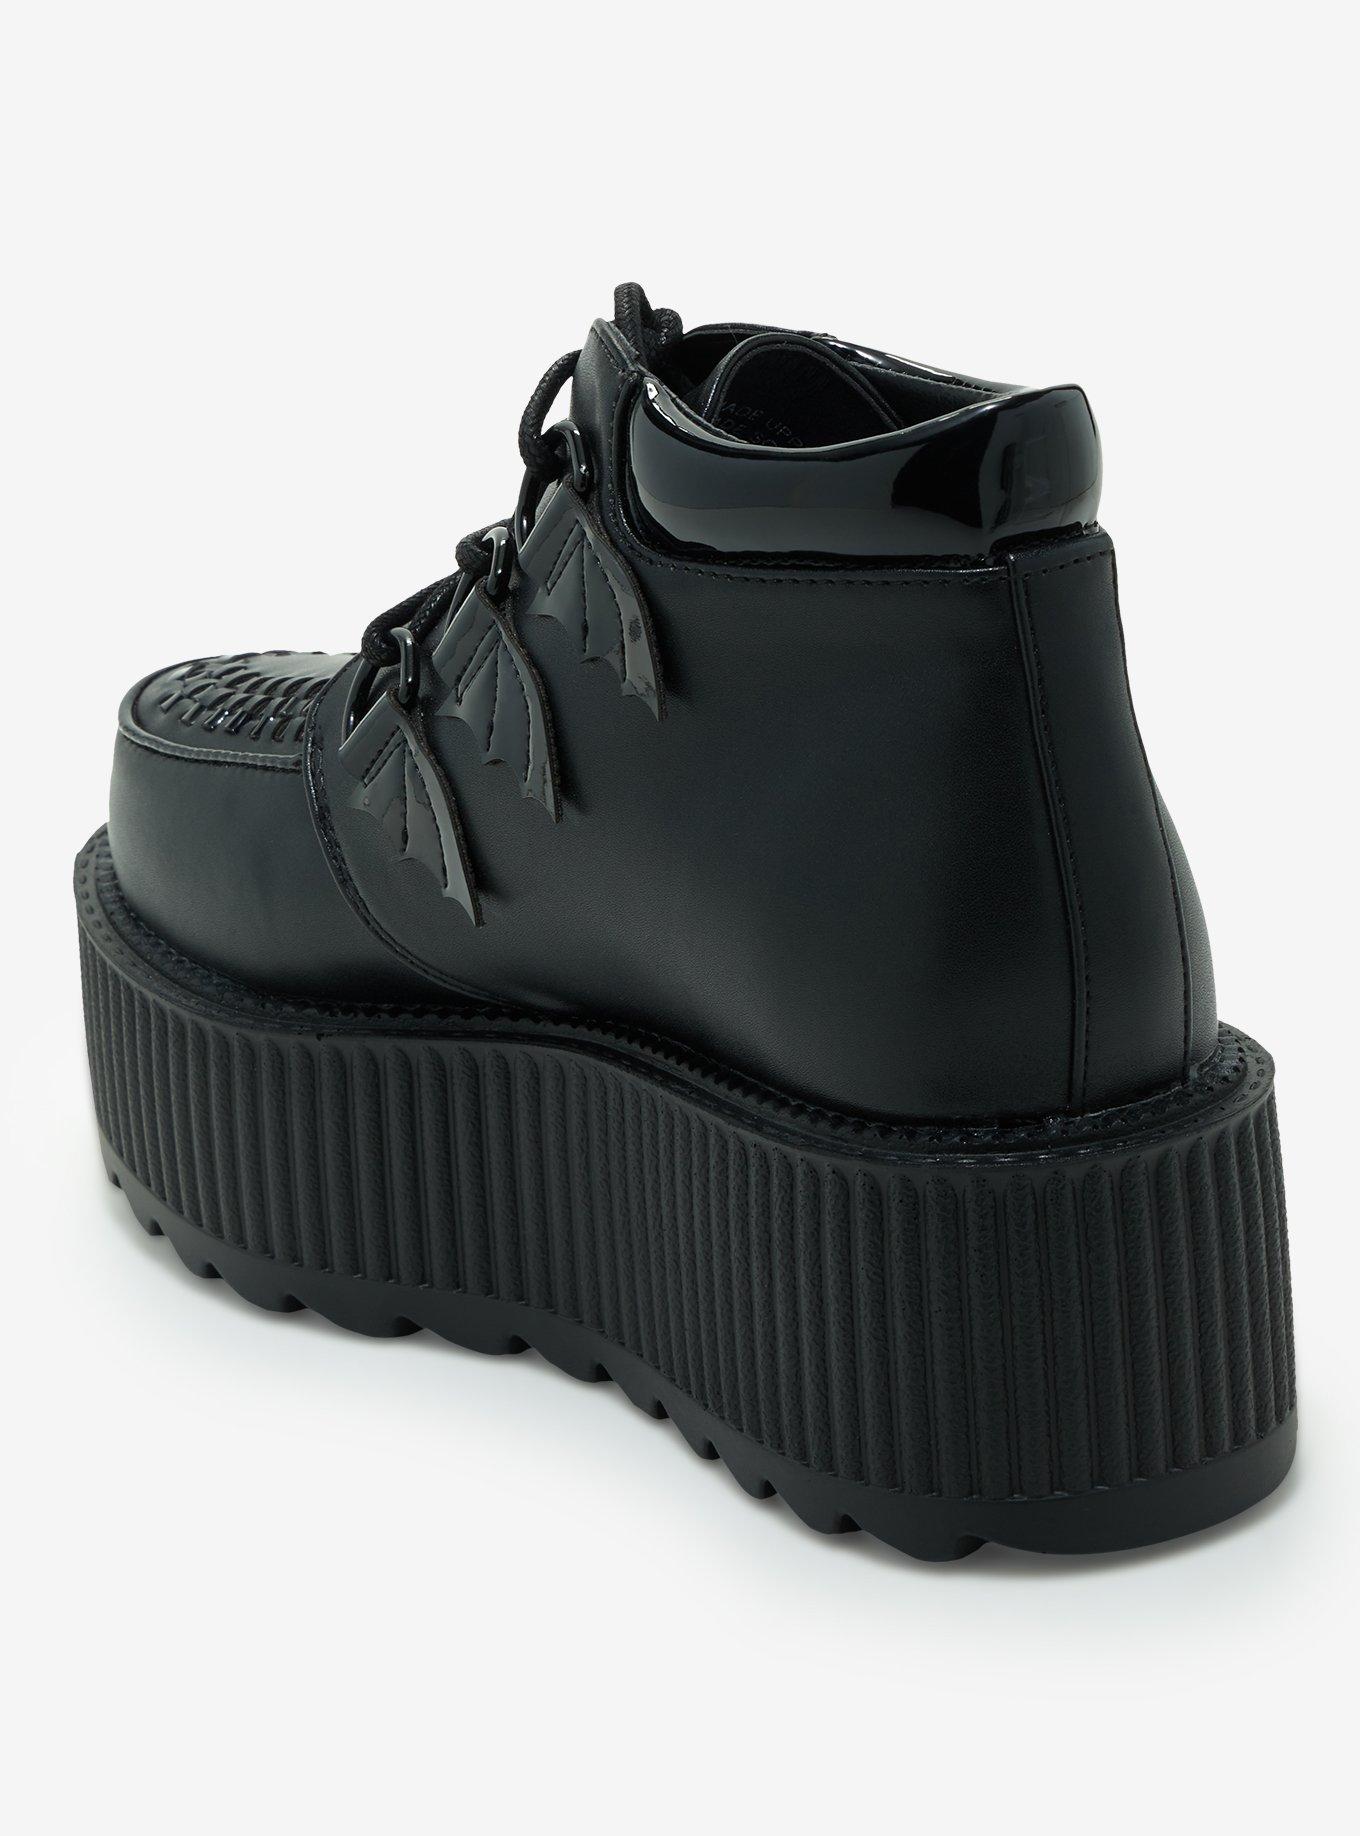 Creepers: Black Creeper Shoes & Plaform Creepers | Hot